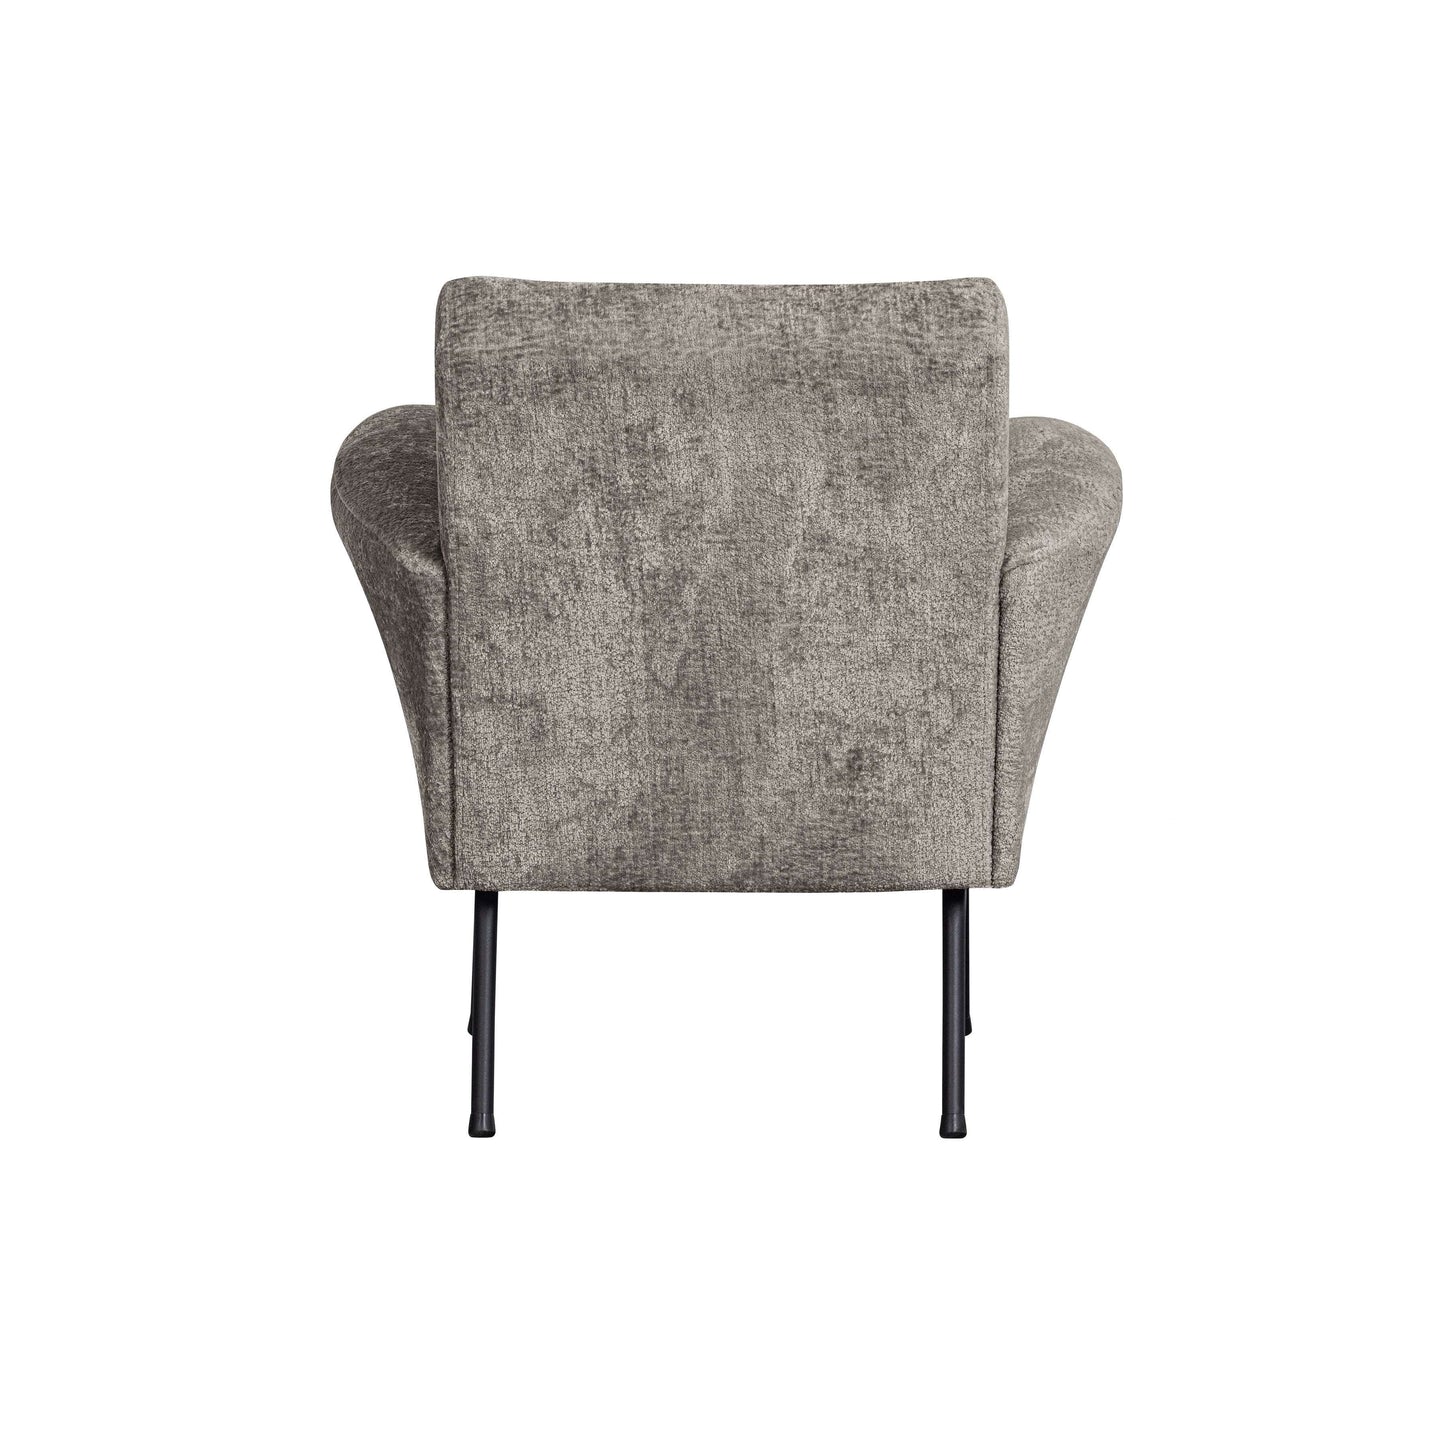 BePureHome Muse fauteuil taupe